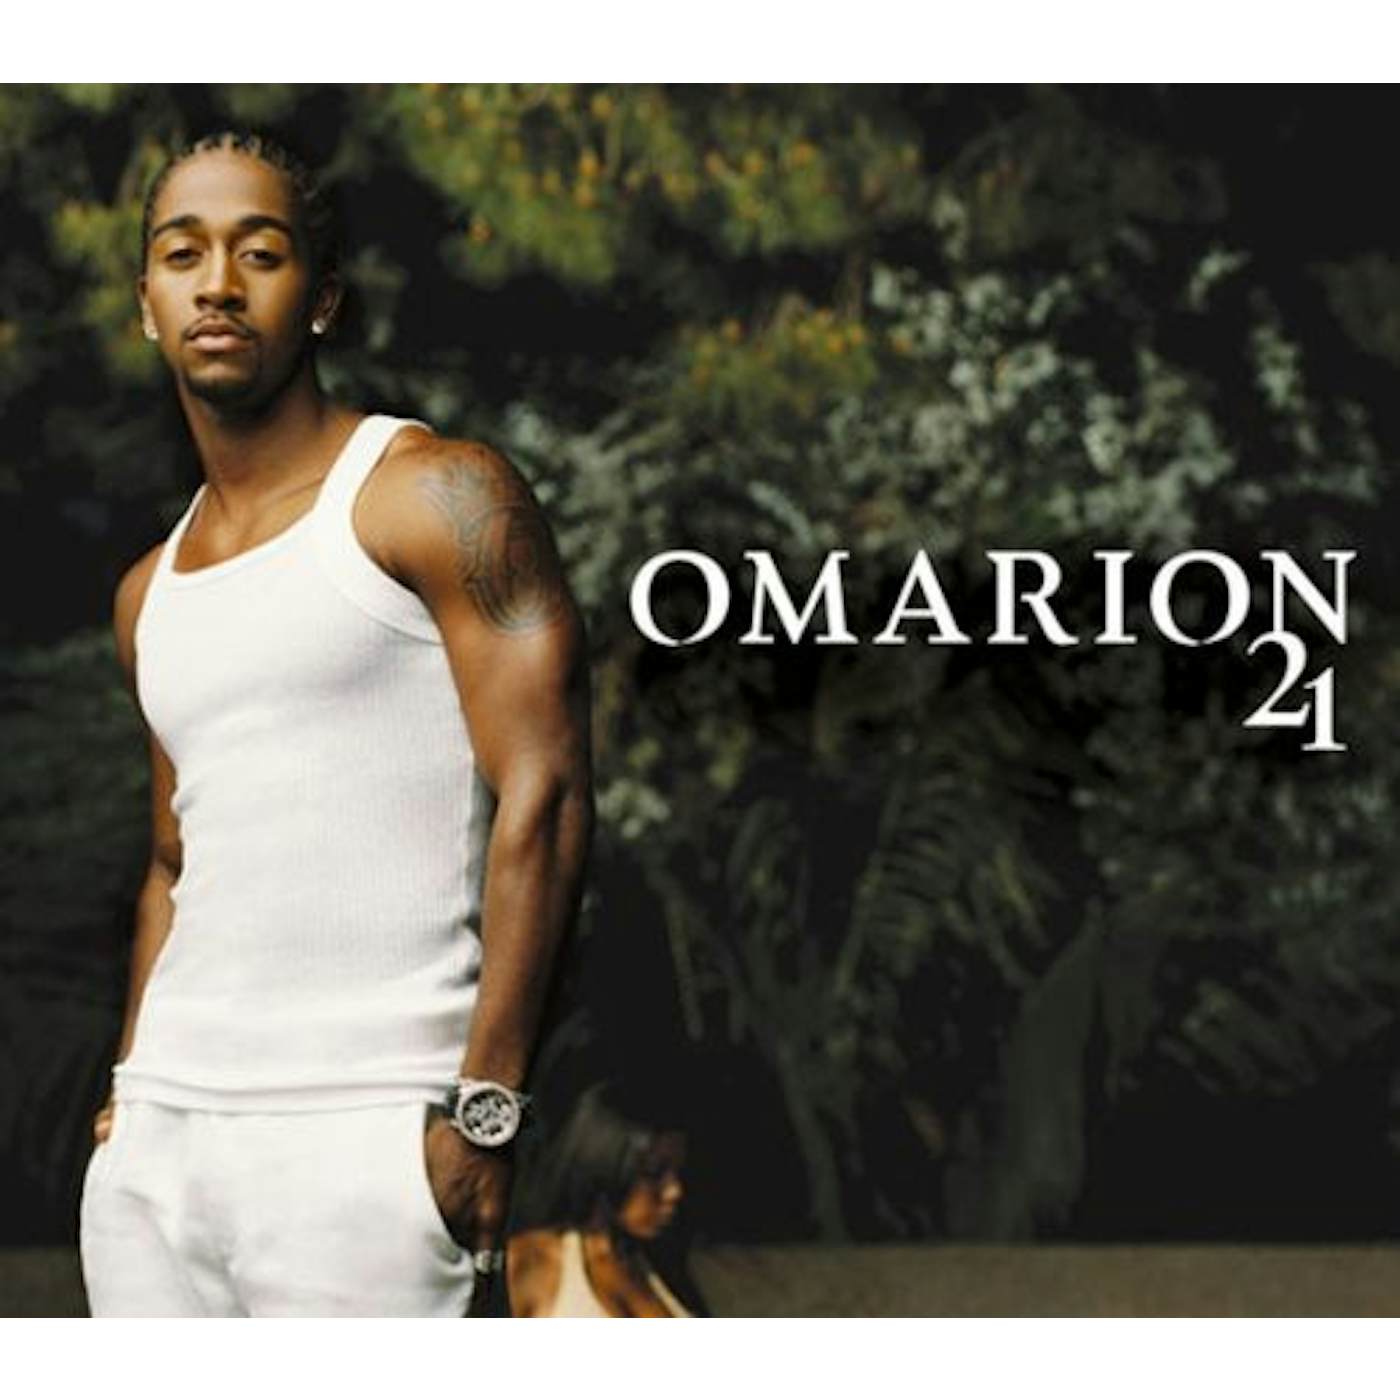 Omarion 21 LIMITED EDITION CD